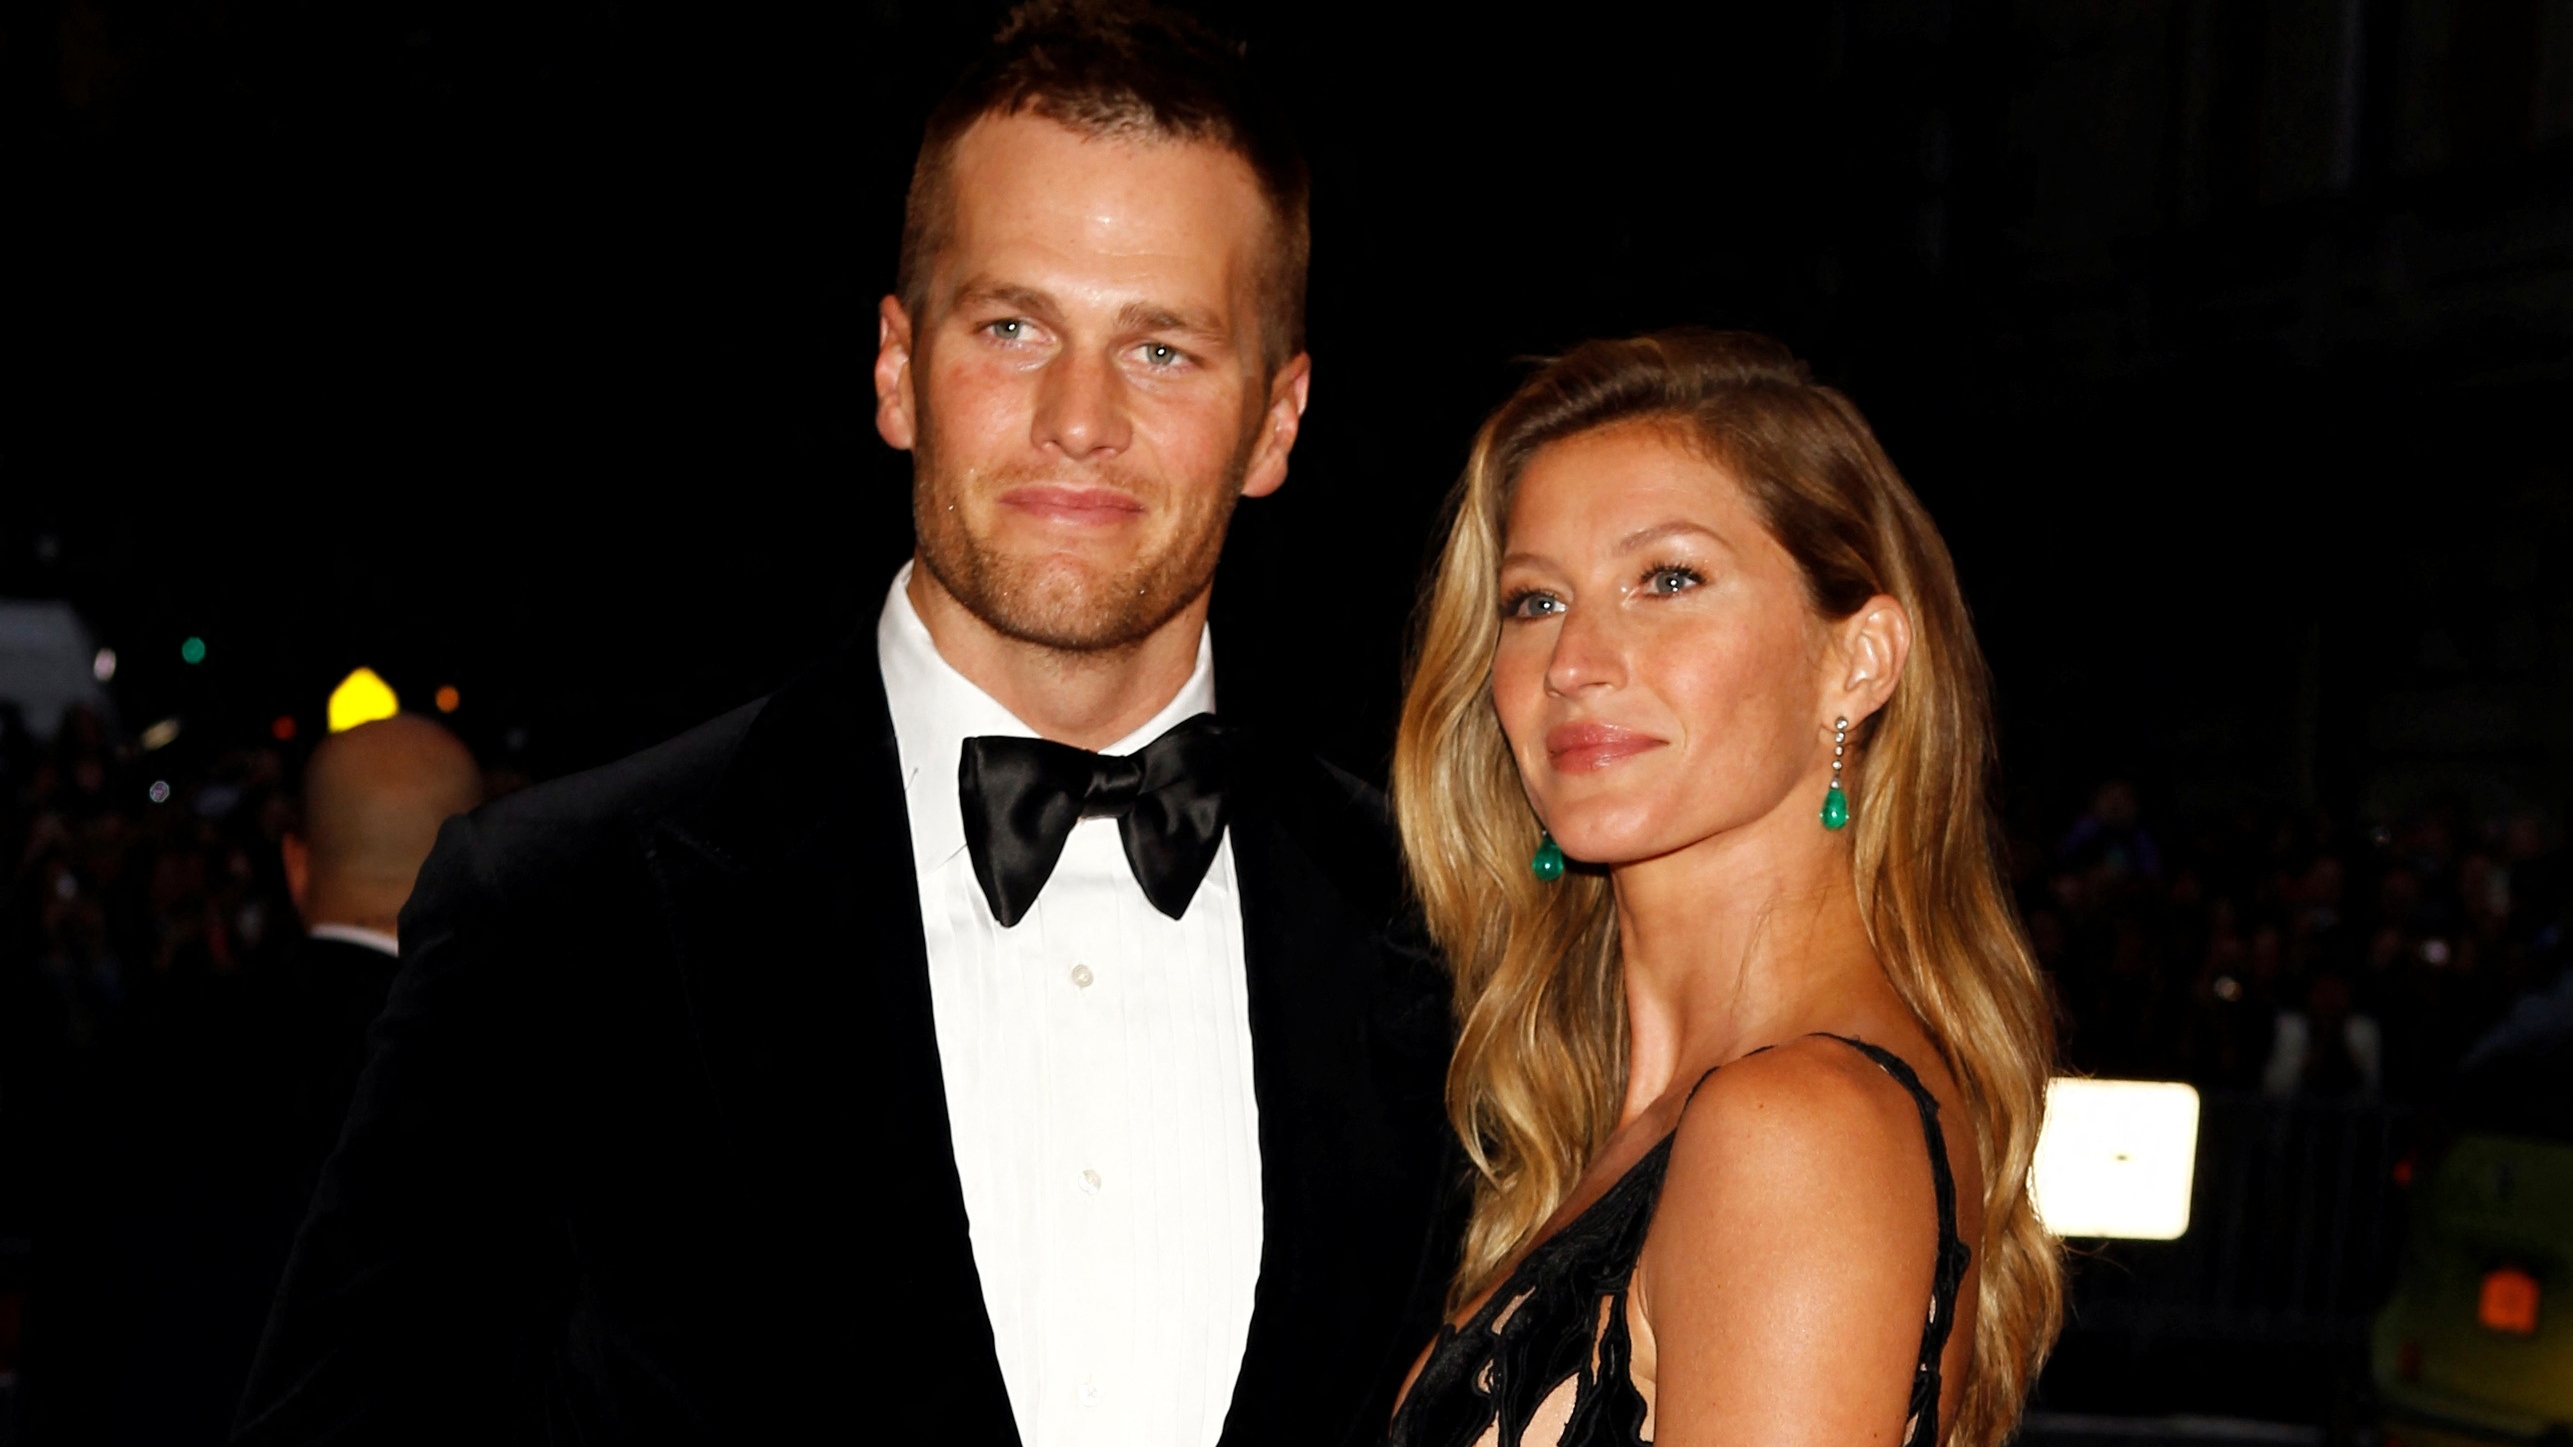 On October 28, the figure of the NFL Tom Brady and the renowned model Gisele Bündchen confirmed their divorce after 13 years of marriage (Reuters)